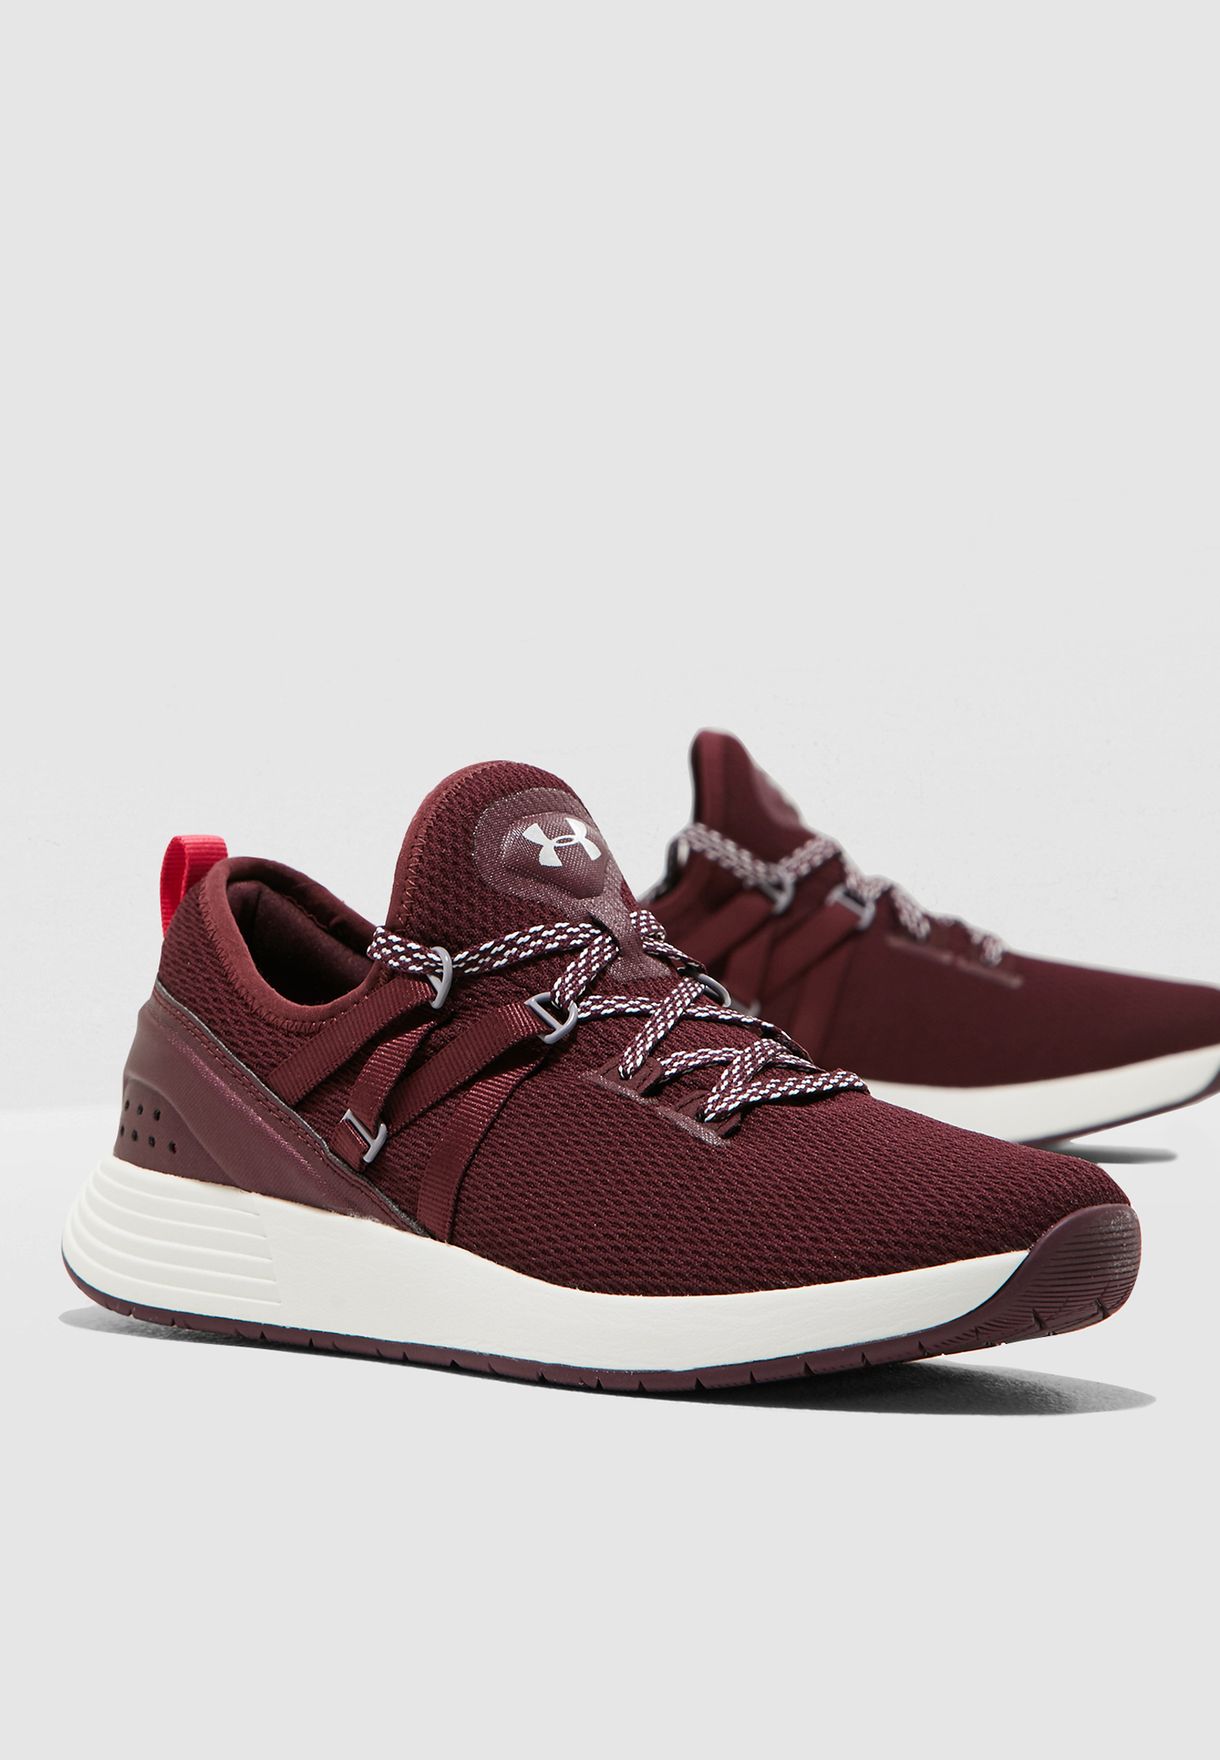 burgundy under armour shoes off 62 